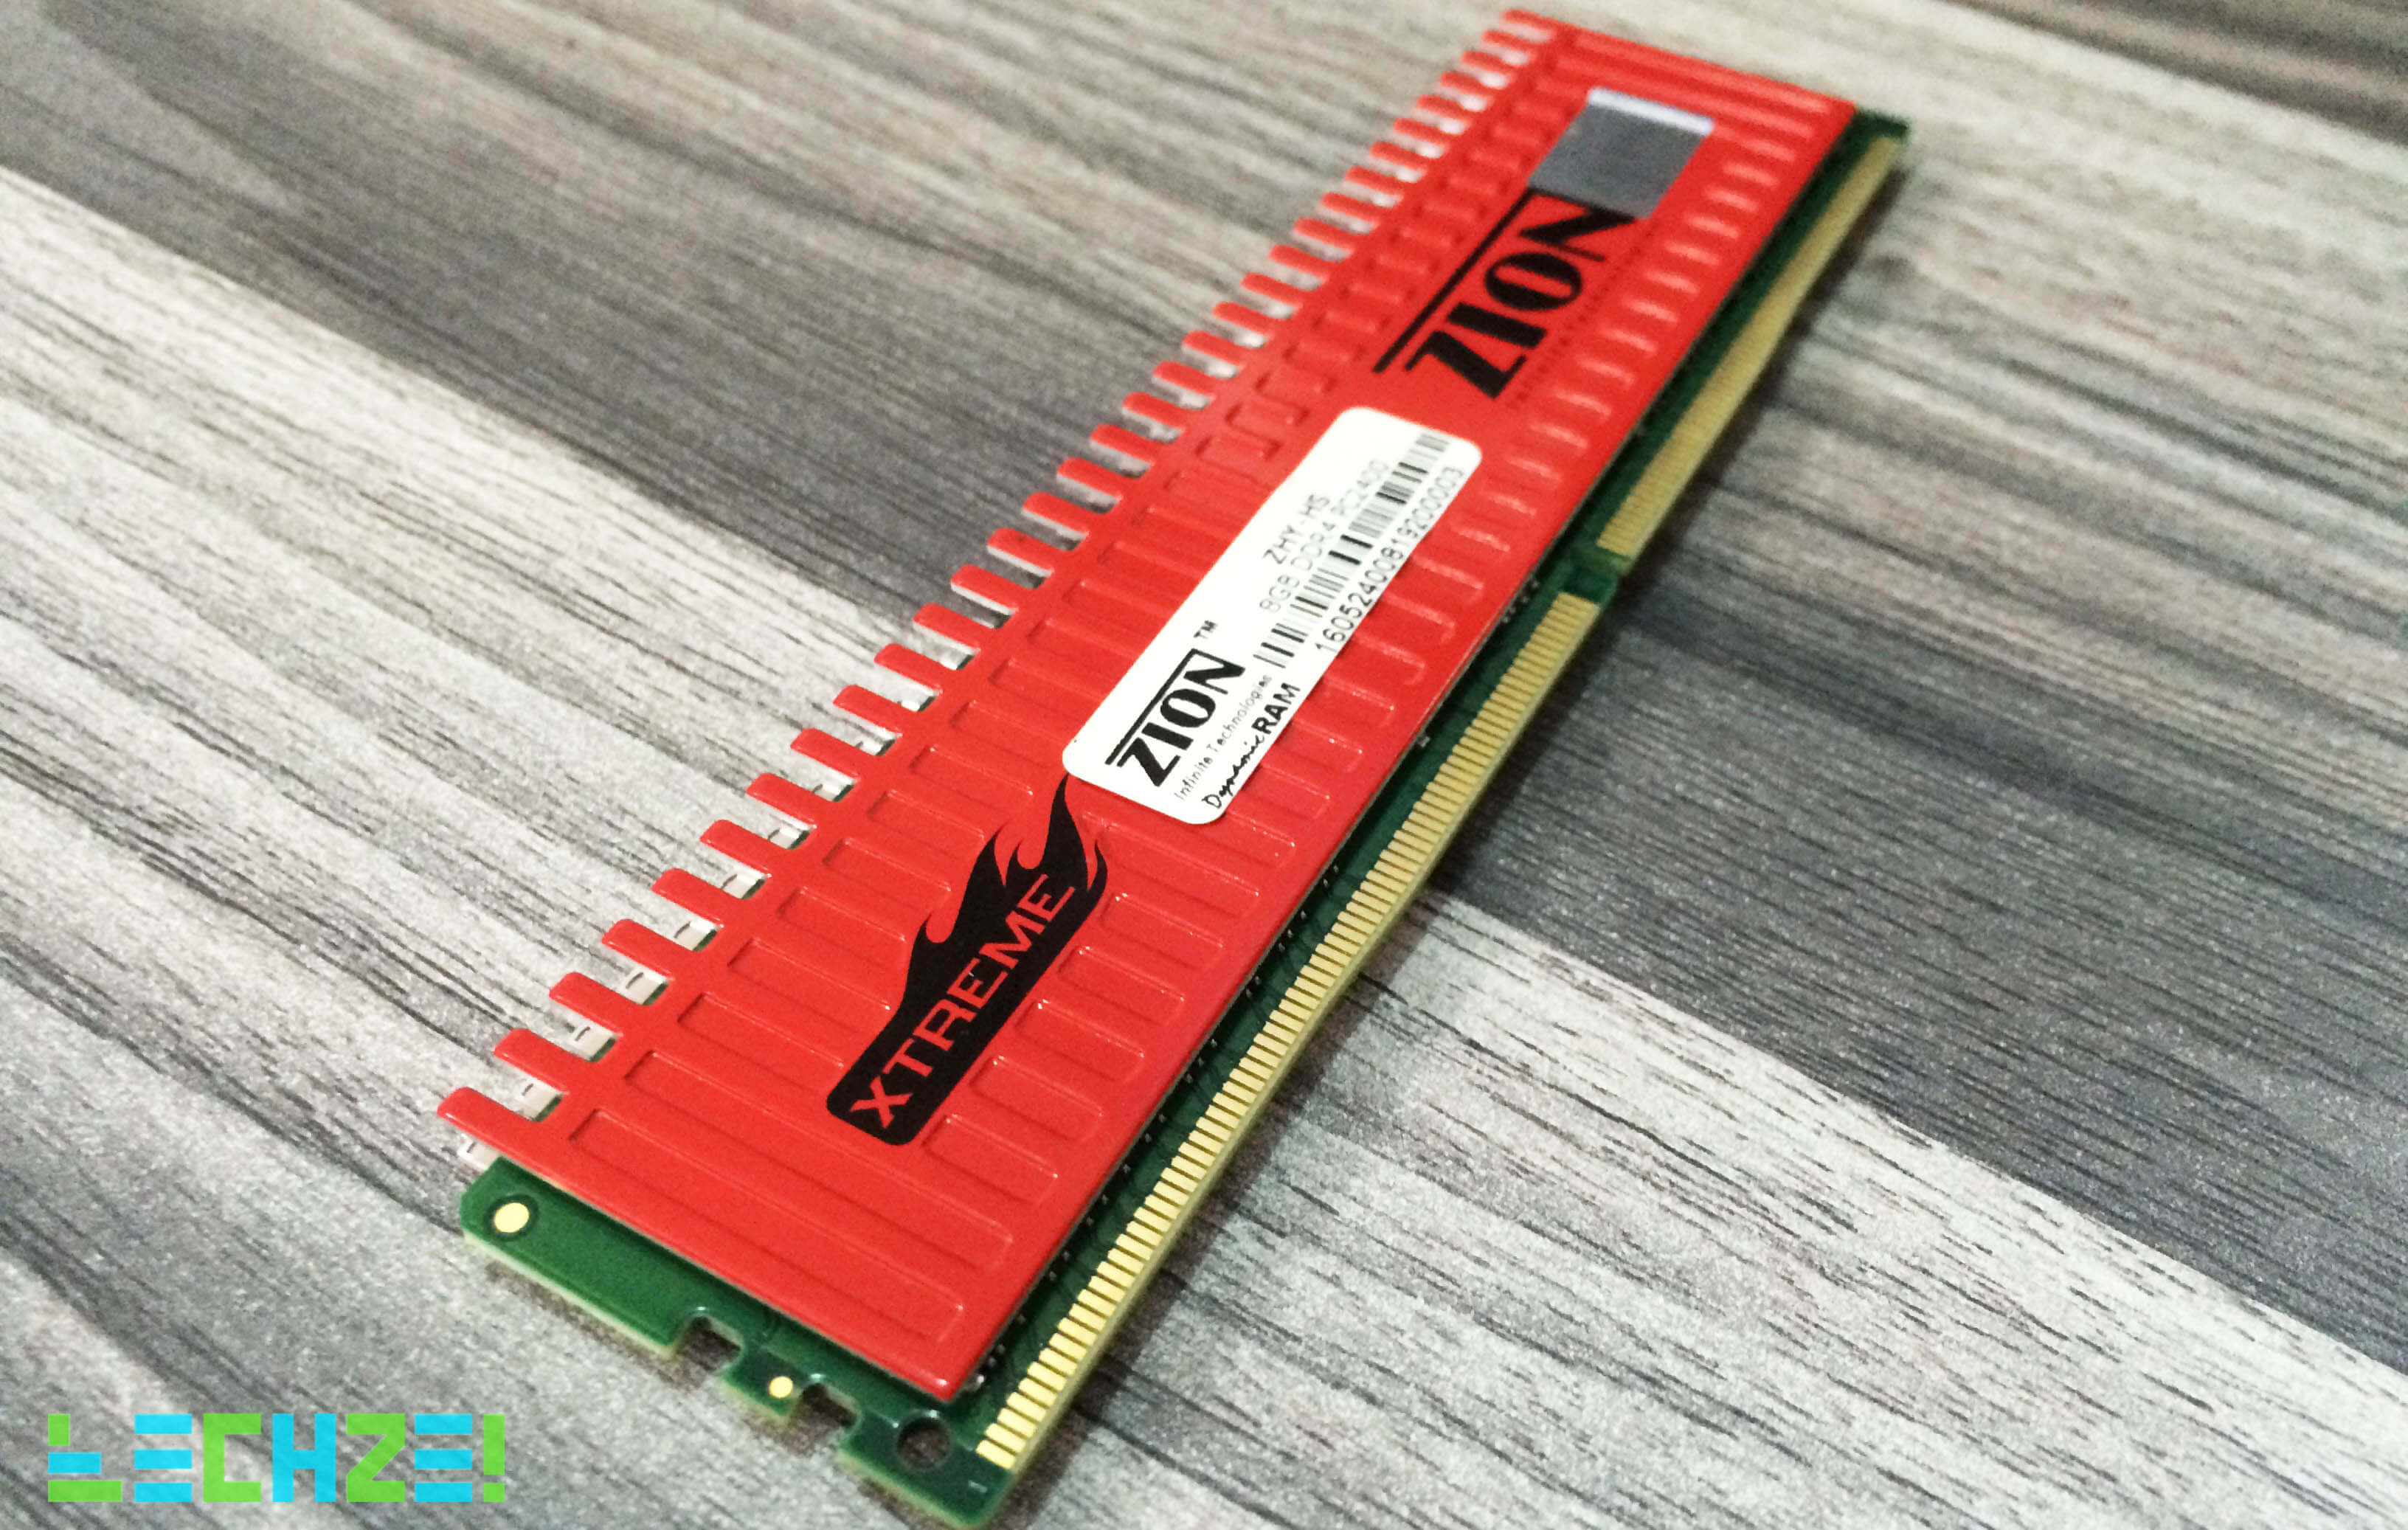 ZION XTREME DDR4 2400 MHz RAM Review